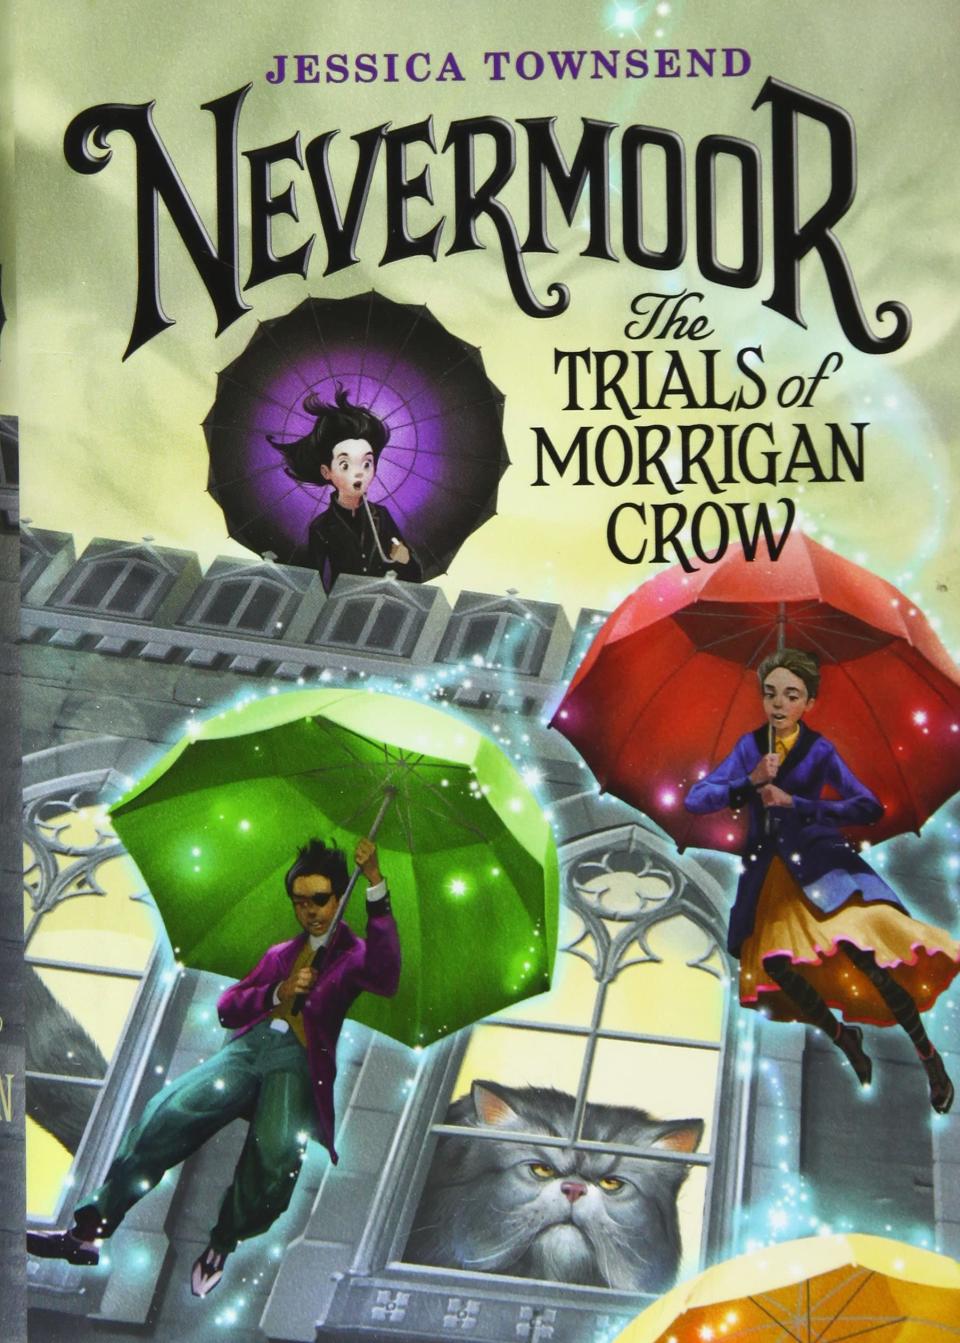 This book in the middle grade Nevermoor series is fun enough to binge on a long plane ride but light enough that you can put it down when it's time to go explore whatever city you're in. Morrigan is cursed — or so she's been told. But on her 11th birthday, she's rescued by a mysterious man and taken to a hidden, magical city called Nevermoor. But in order to stay, she has to compete for a spot in the coveted Wundrous Society. The only problem? Morrigan doesn't have any powers. Or does she? —Kirby Beaton